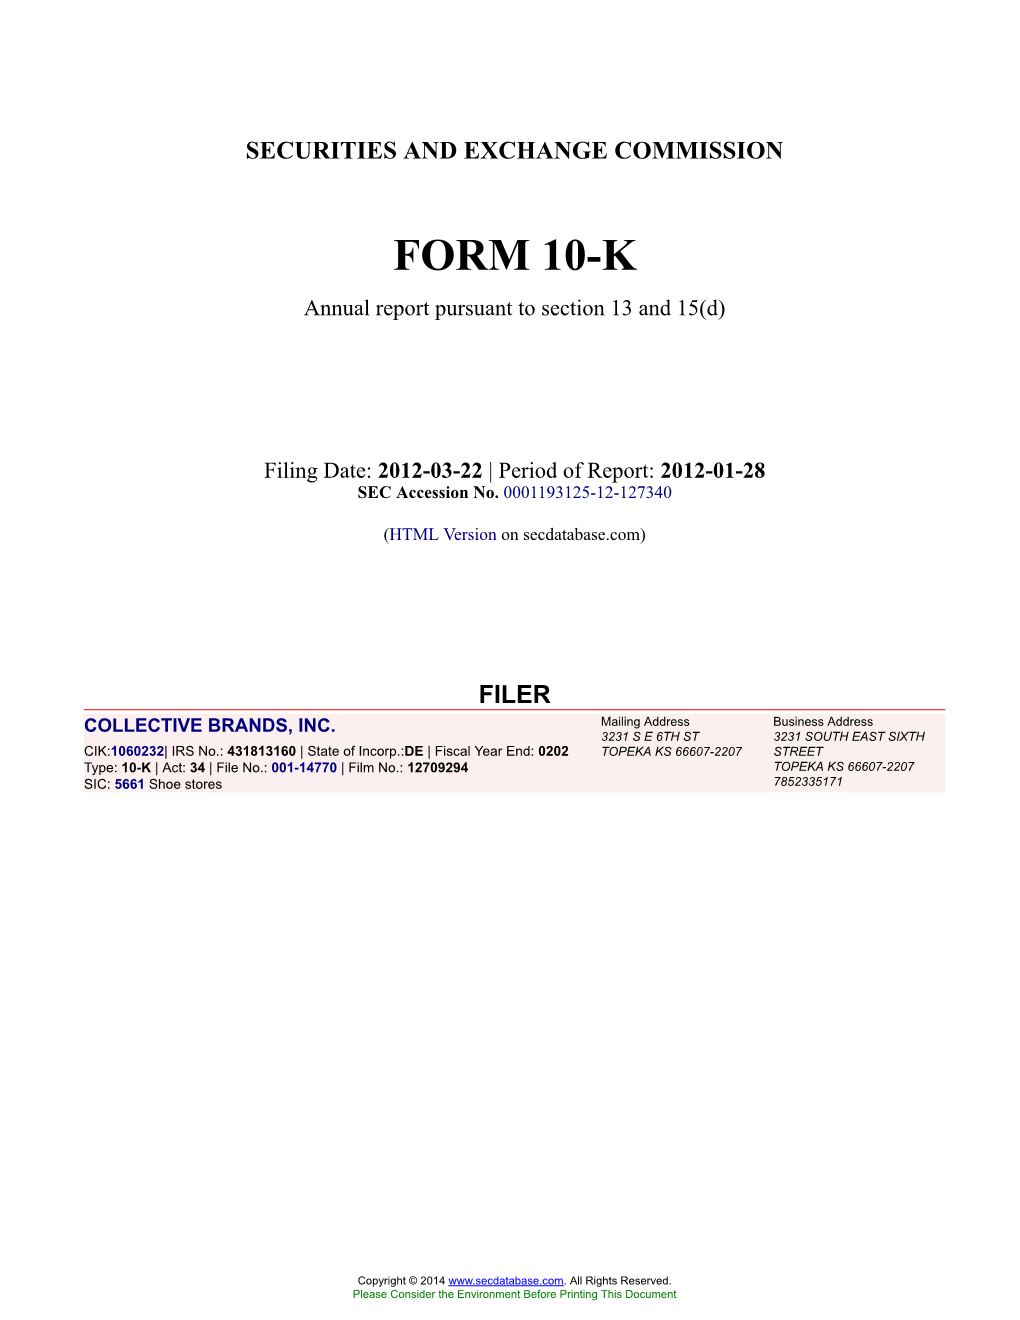 COLLECTIVE BRANDS, INC. Form 10-K Annual Report Filed 2012-03-22